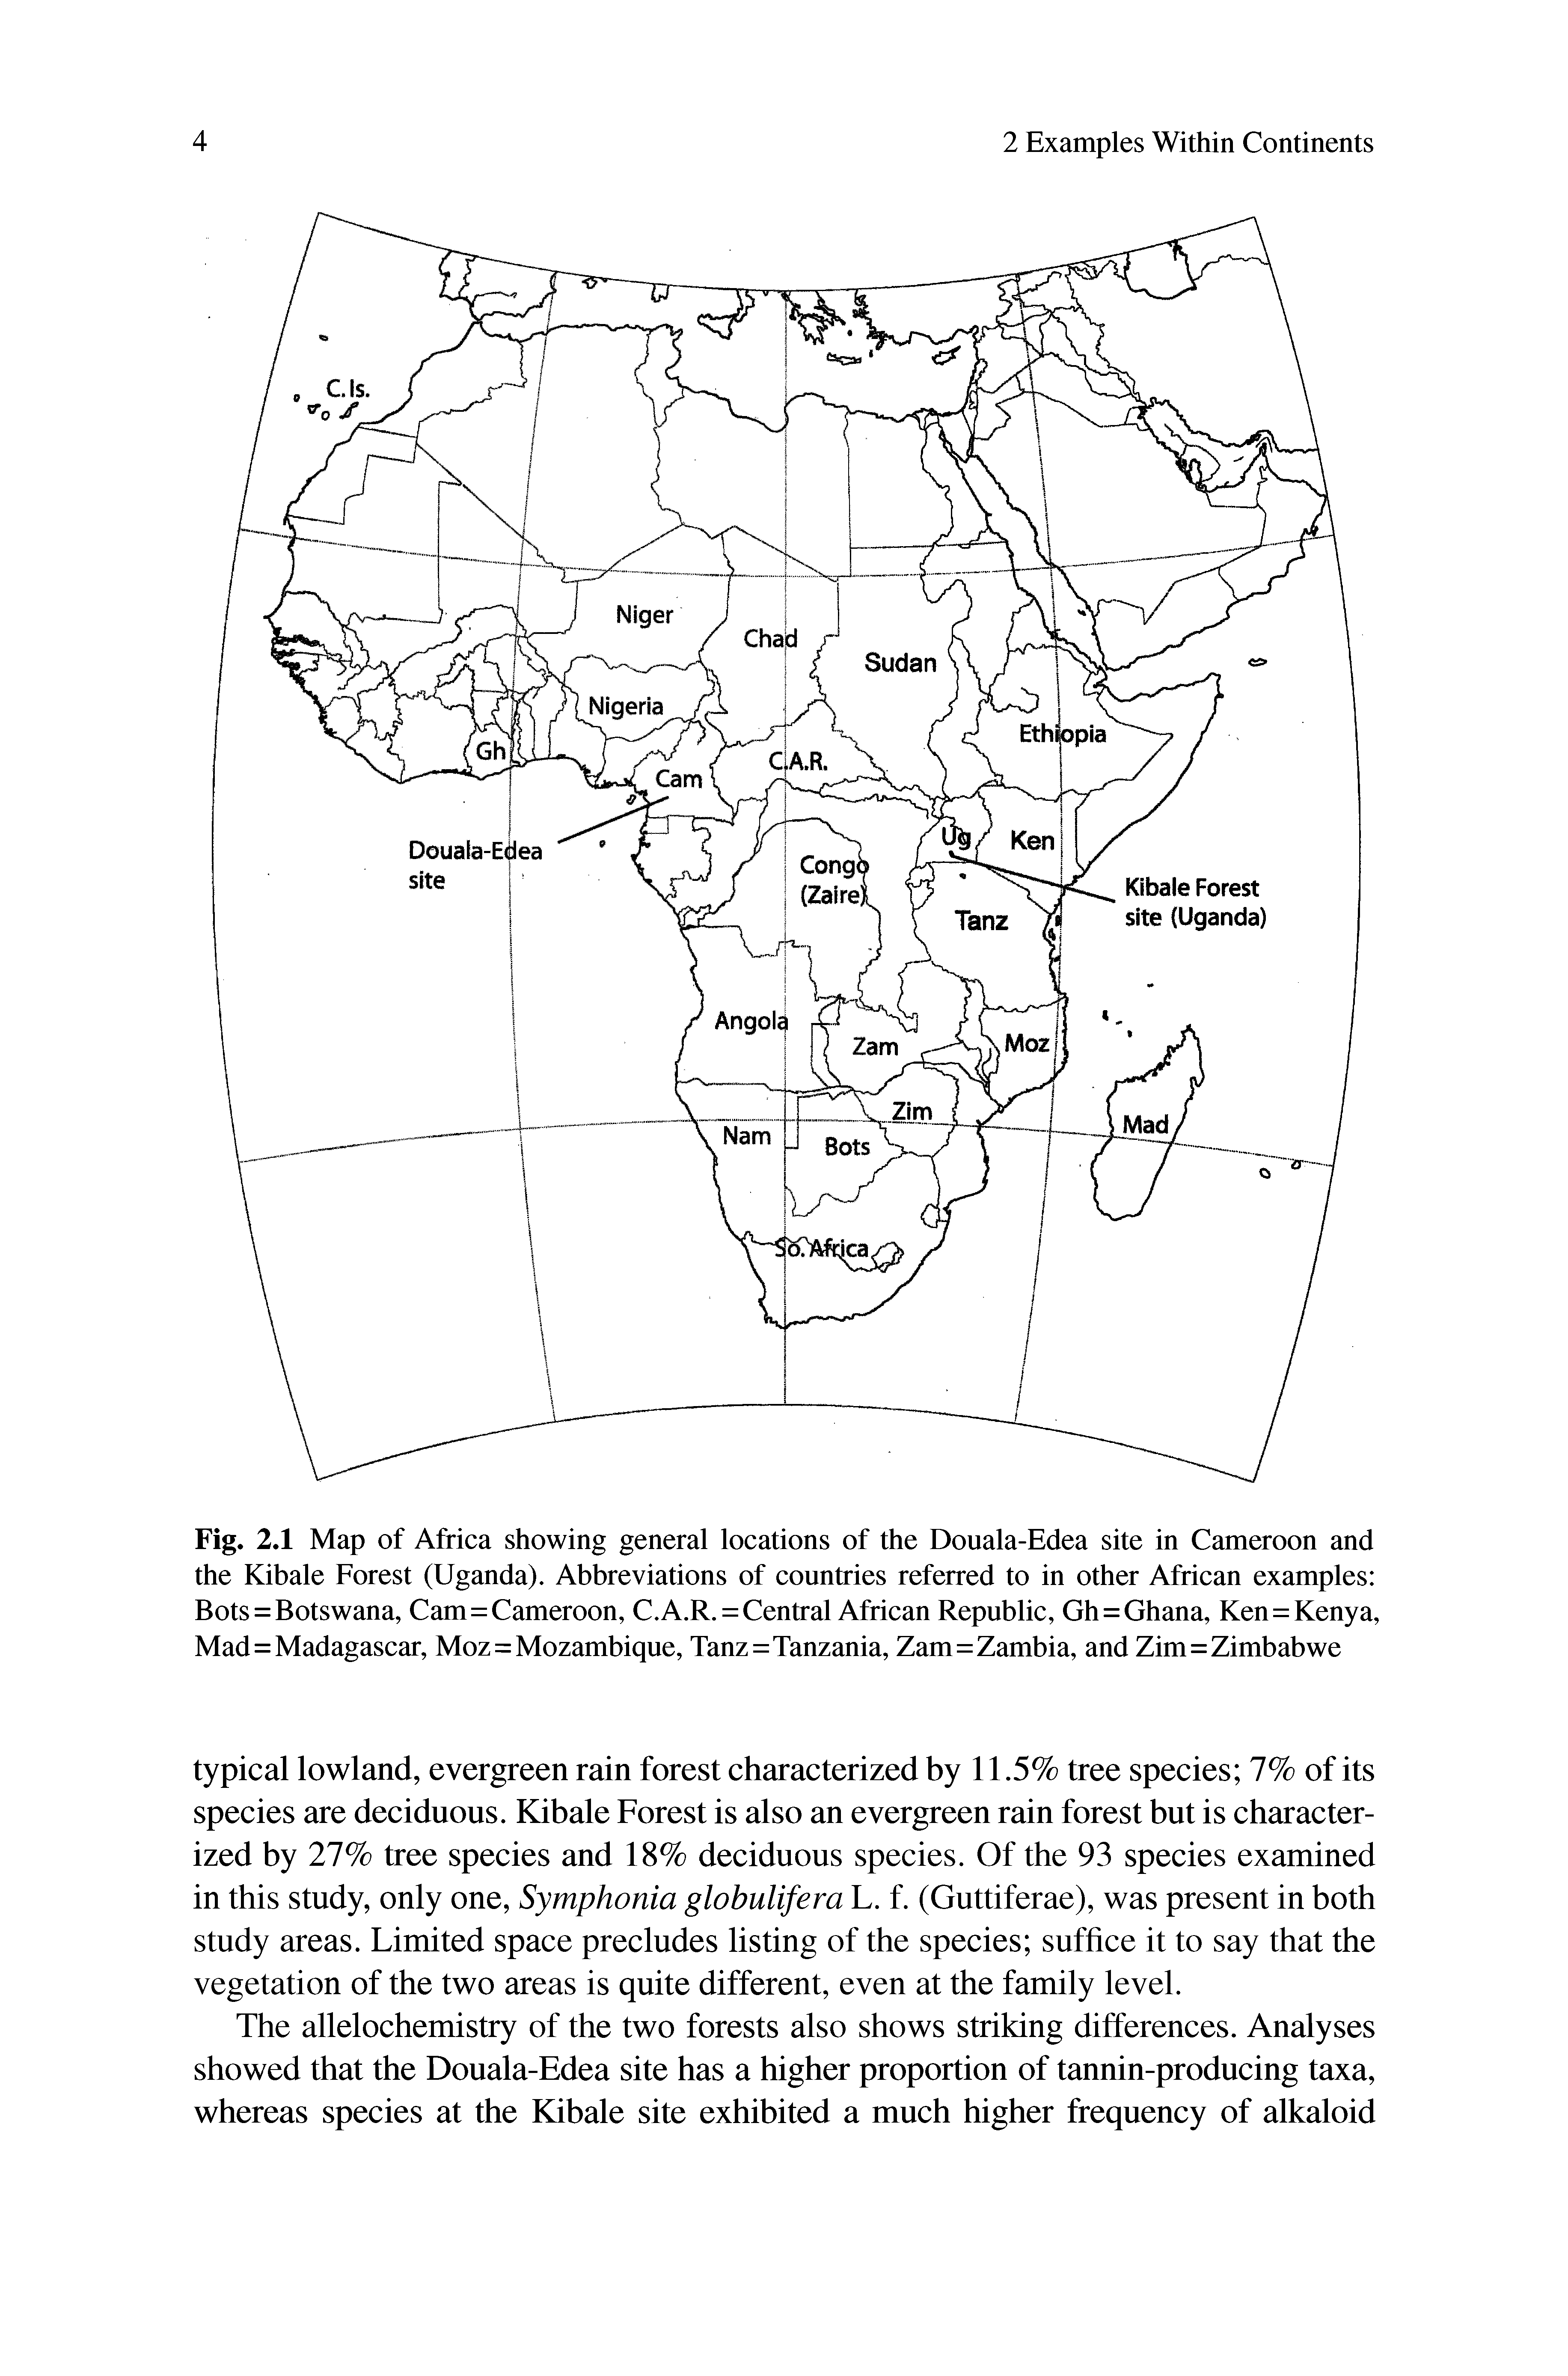 Fig. 2.1 Map of Africa showing general locations of the Douala-Edea site in Cameroon and the Kibale Forest (Uganda). Abbreviations of countries referred to in other African examples Bots = Botswana, Cam=Cameroon, C.A.R. = Central African Republic, Gh = Ghana, Ken=Kenya, Mad=Madagascar, Moz=Mozambique, Tanz=Tanzania, Zam=Zambia, and Zim=Zimbabwe...